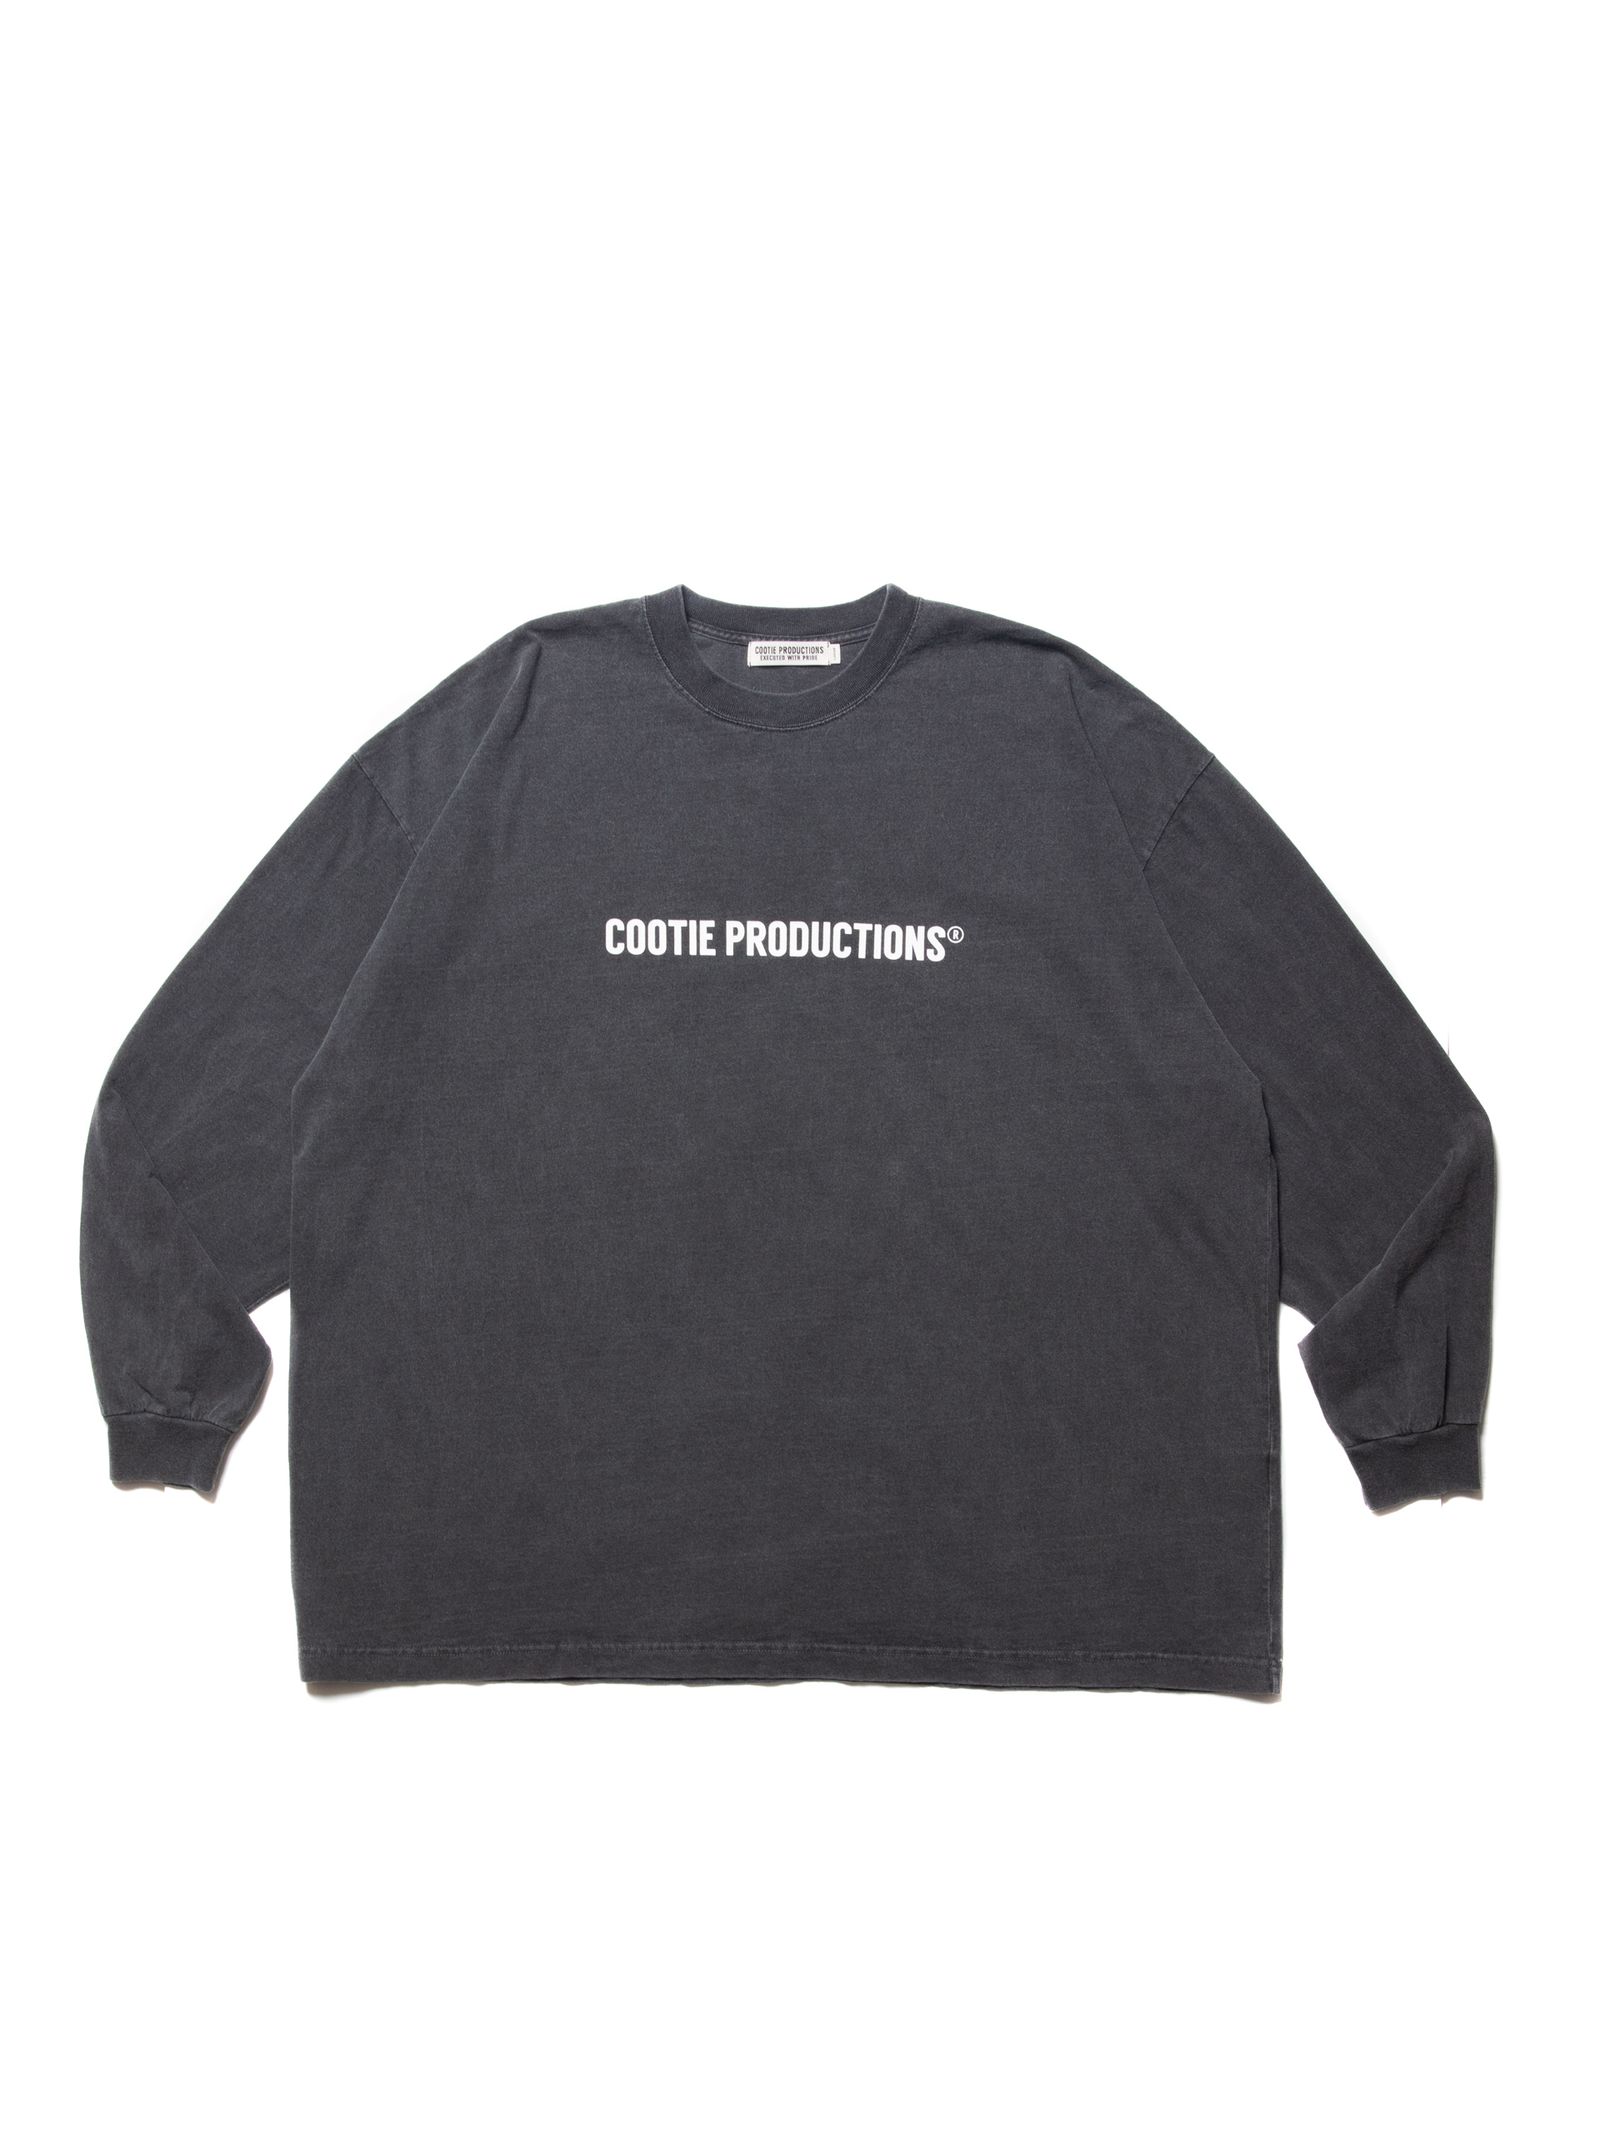 COOTIE PRODUCTIONS - PIGMENT DYED L/S TEE (BLACK) / ピグメントダイ